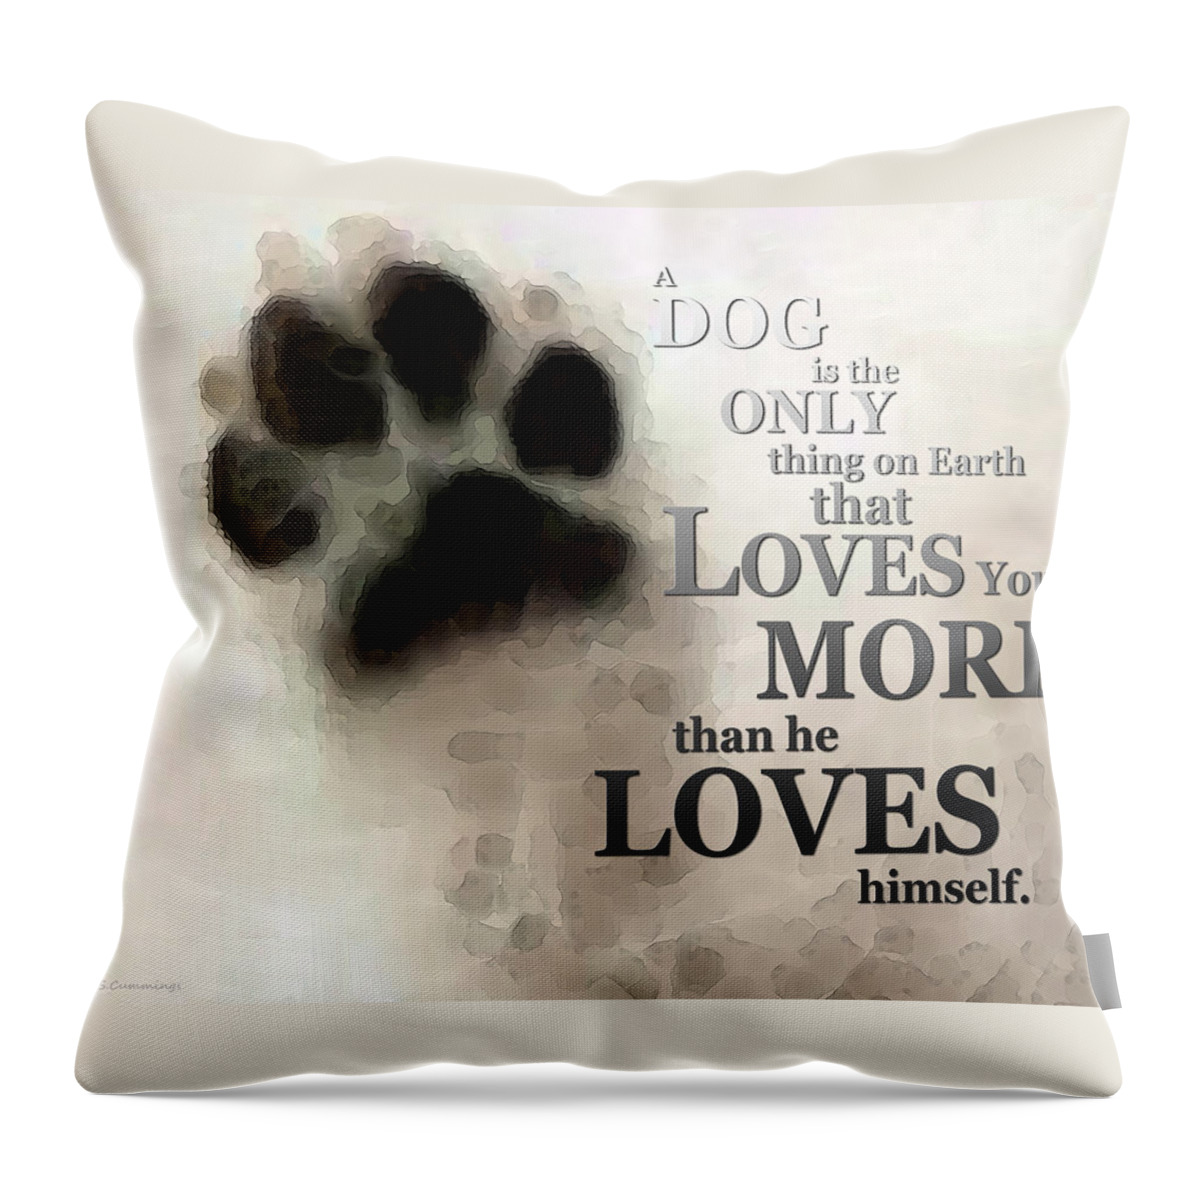 Dog Throw Pillow featuring the painting True Love - By Sharon Cummings Words by Billings by Sharon Cummings